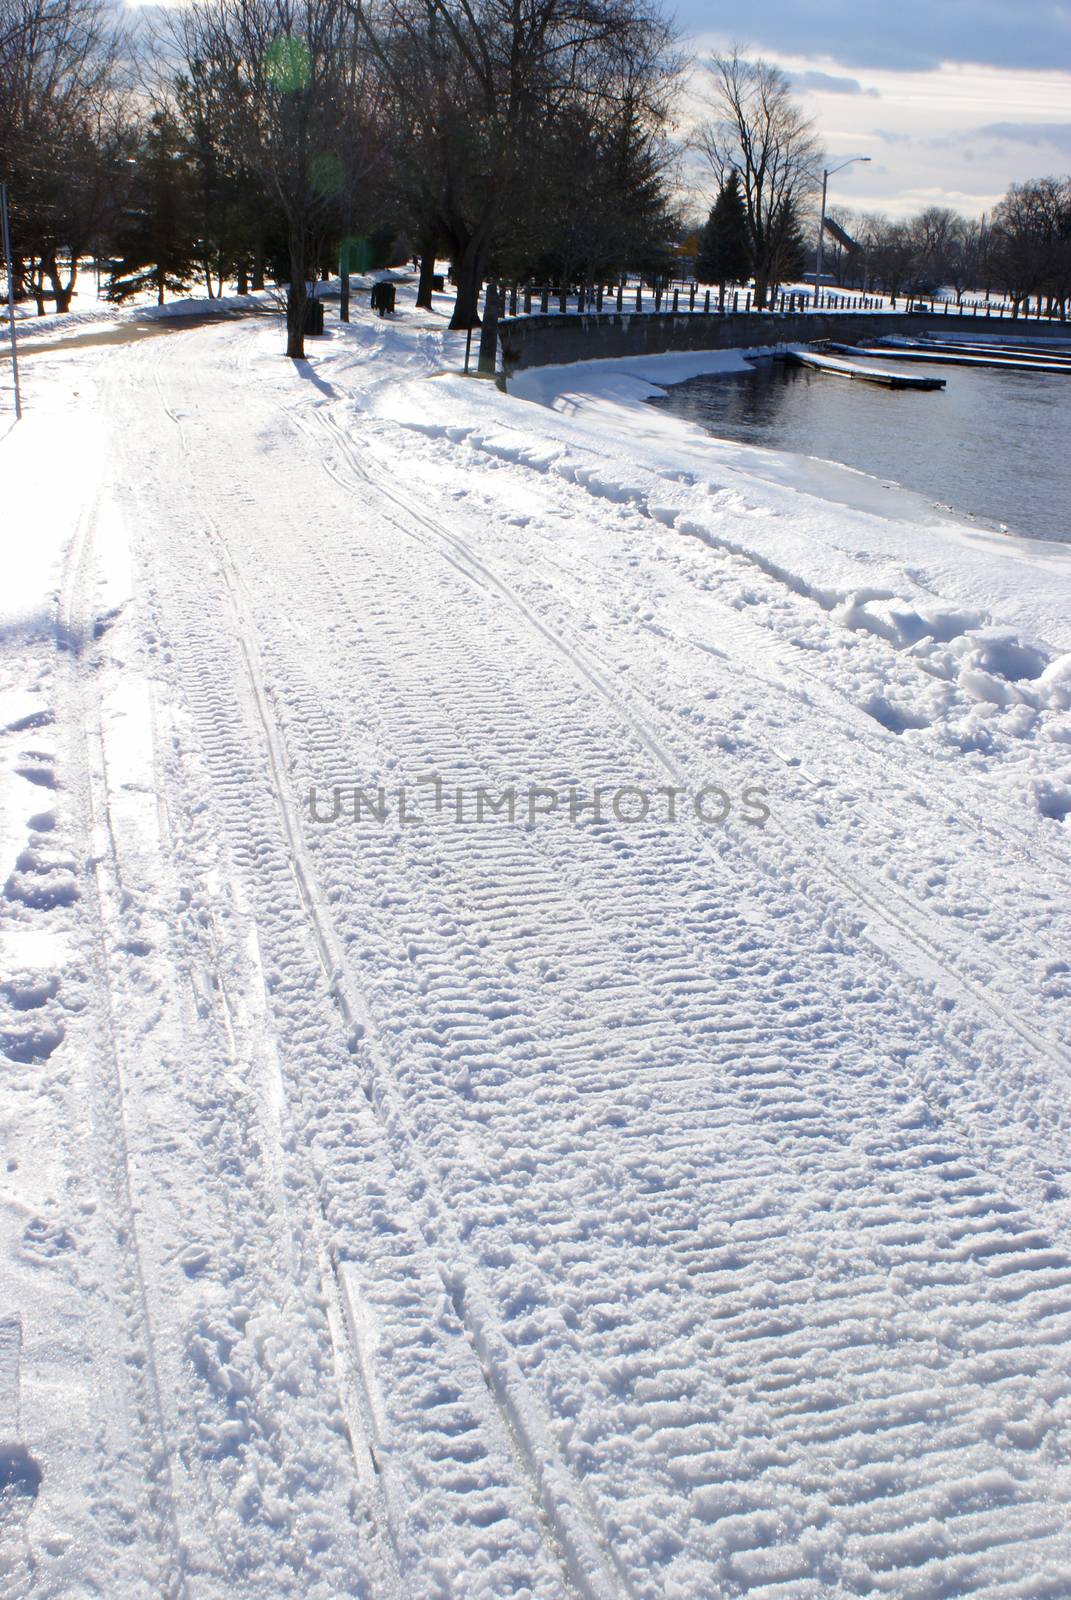 A closeup vertical view of some fresh snowmobile tracks in the winter snow.